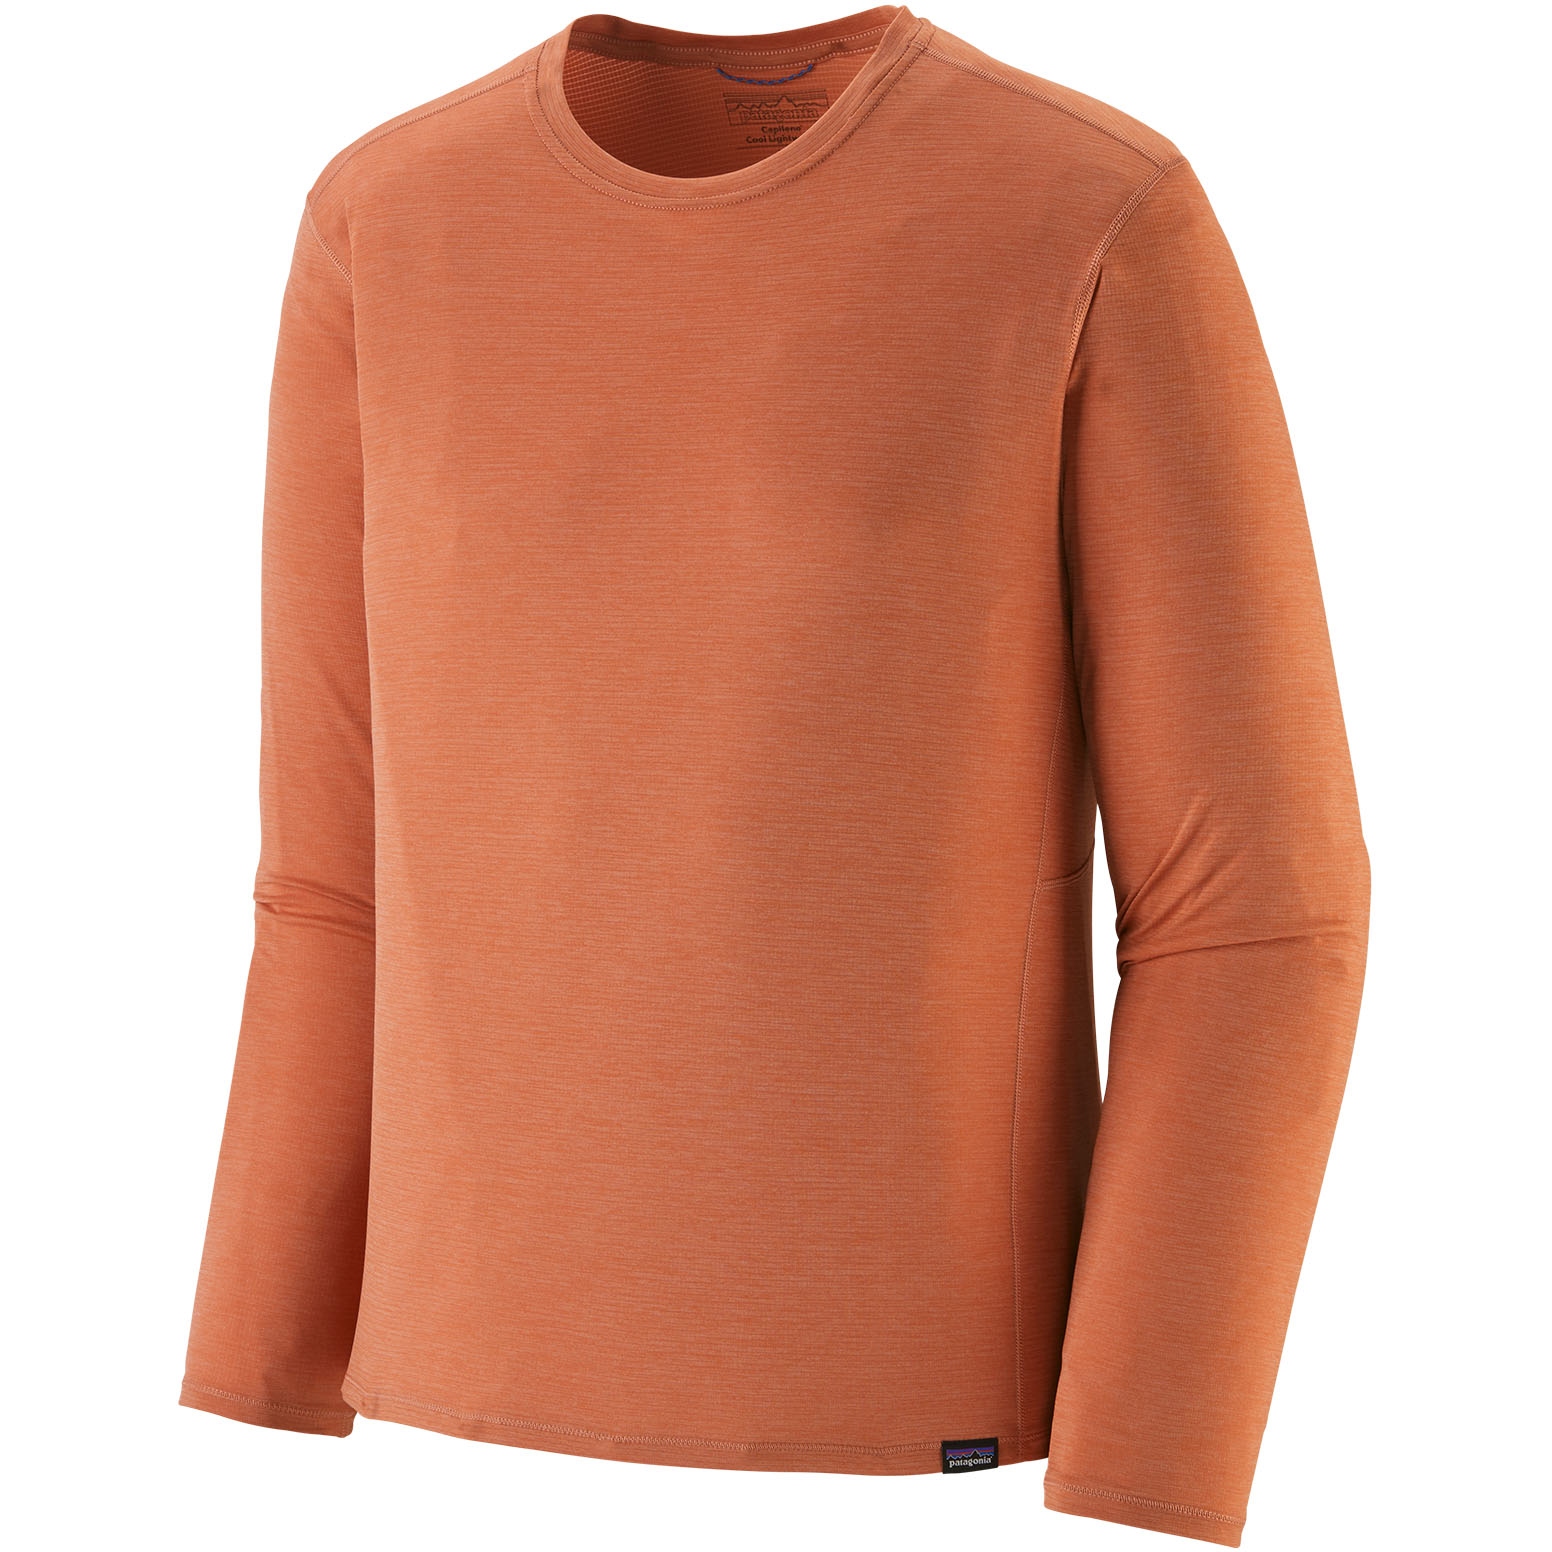 Picture of Patagonia Capilene Cool Lightweight Long Sleeve Shirt Men - Sienna Clay - Light Sienna Clay X-Dye